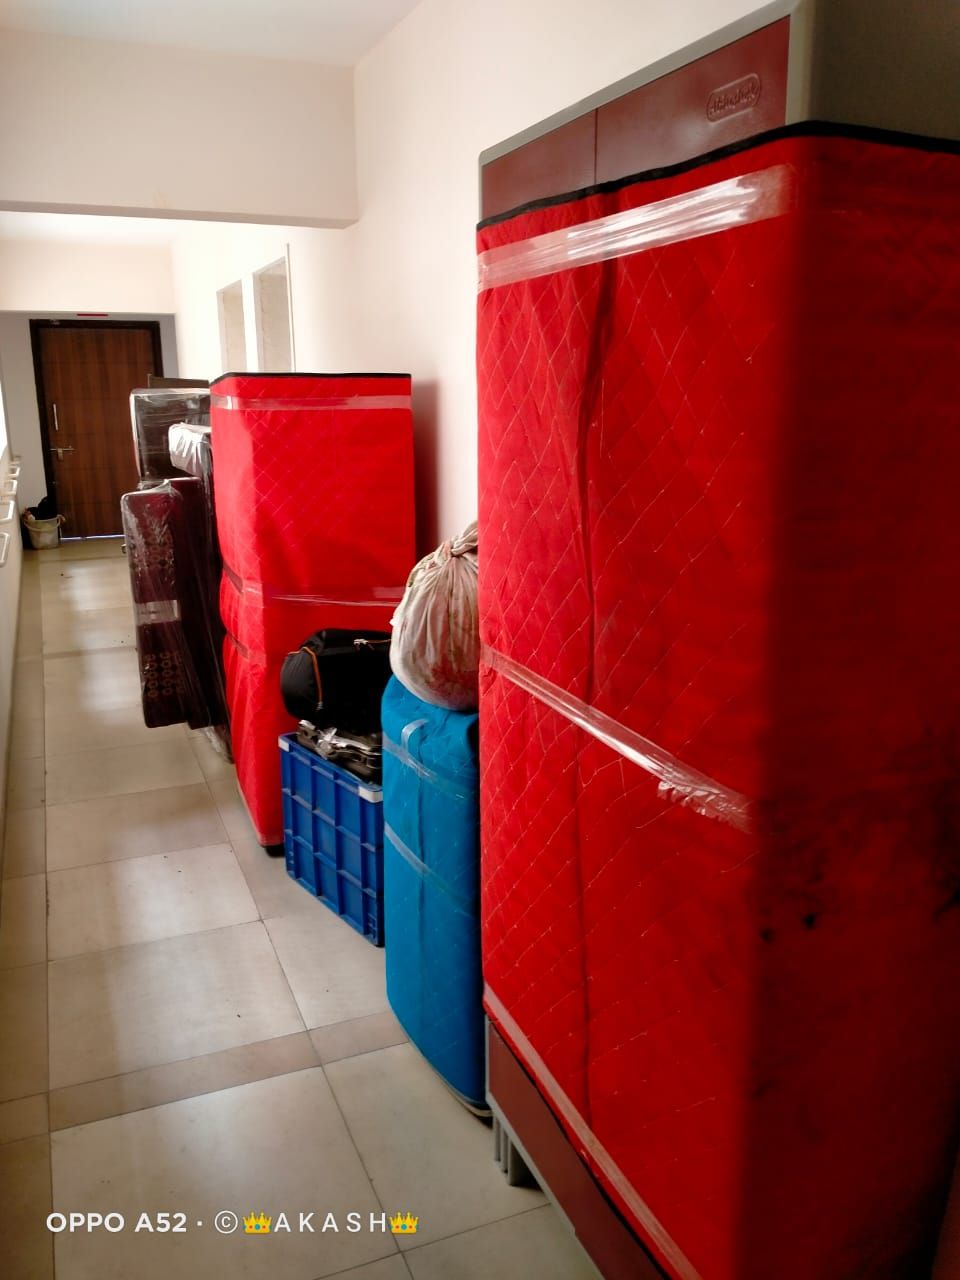 Packers and Movers in Hinjewadi | Movers And Packers near me 